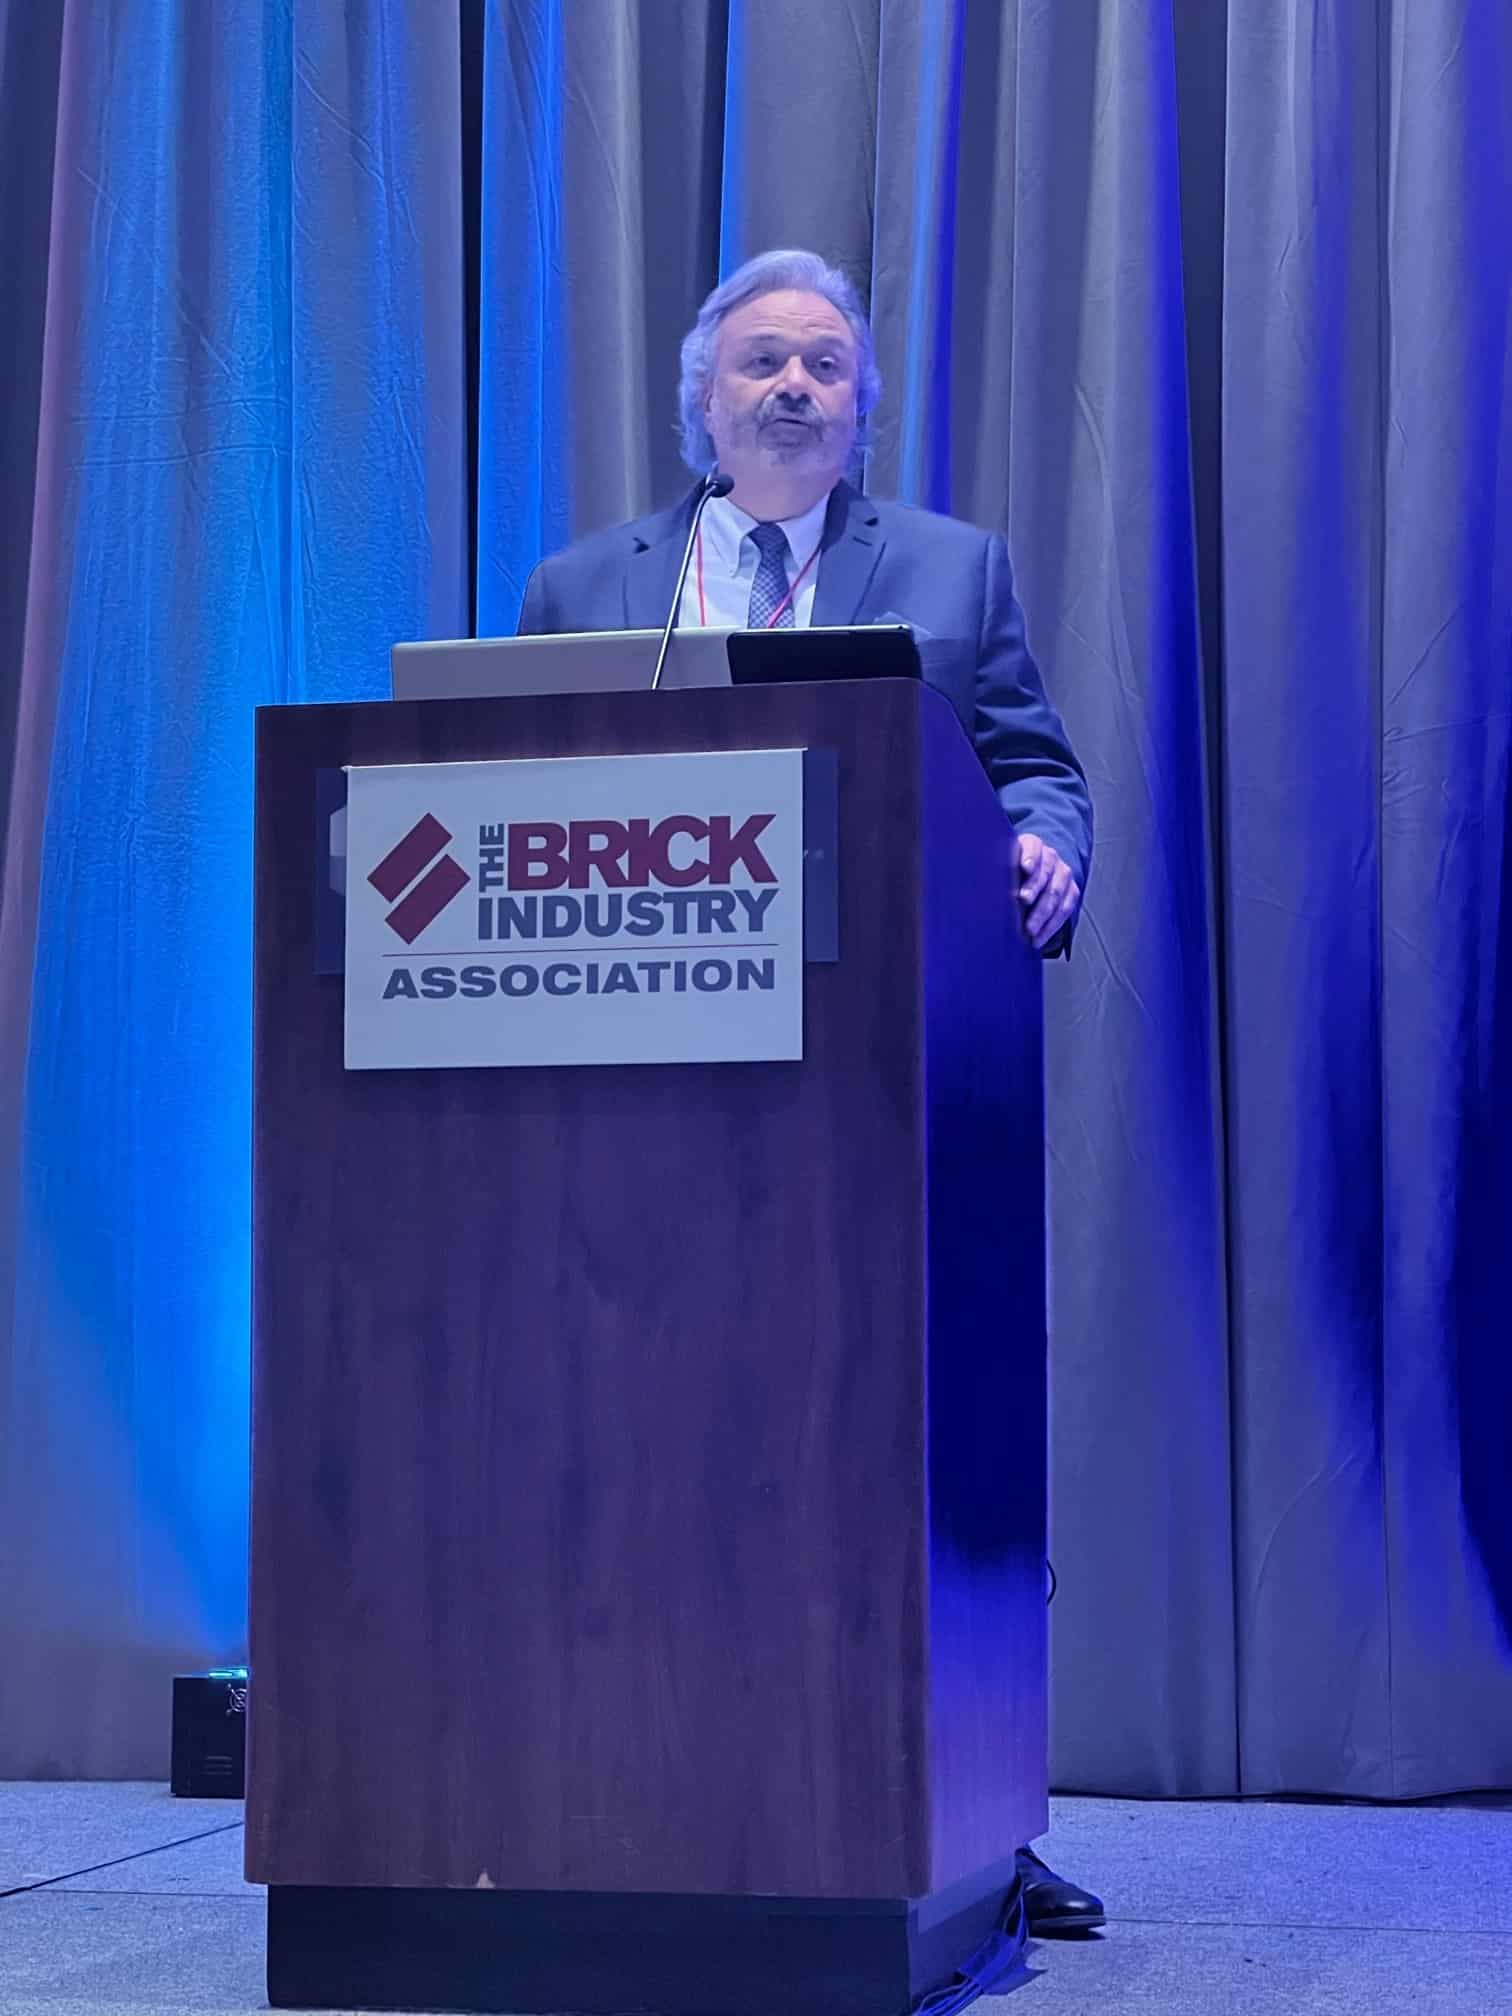 The Brick Industry Association Event